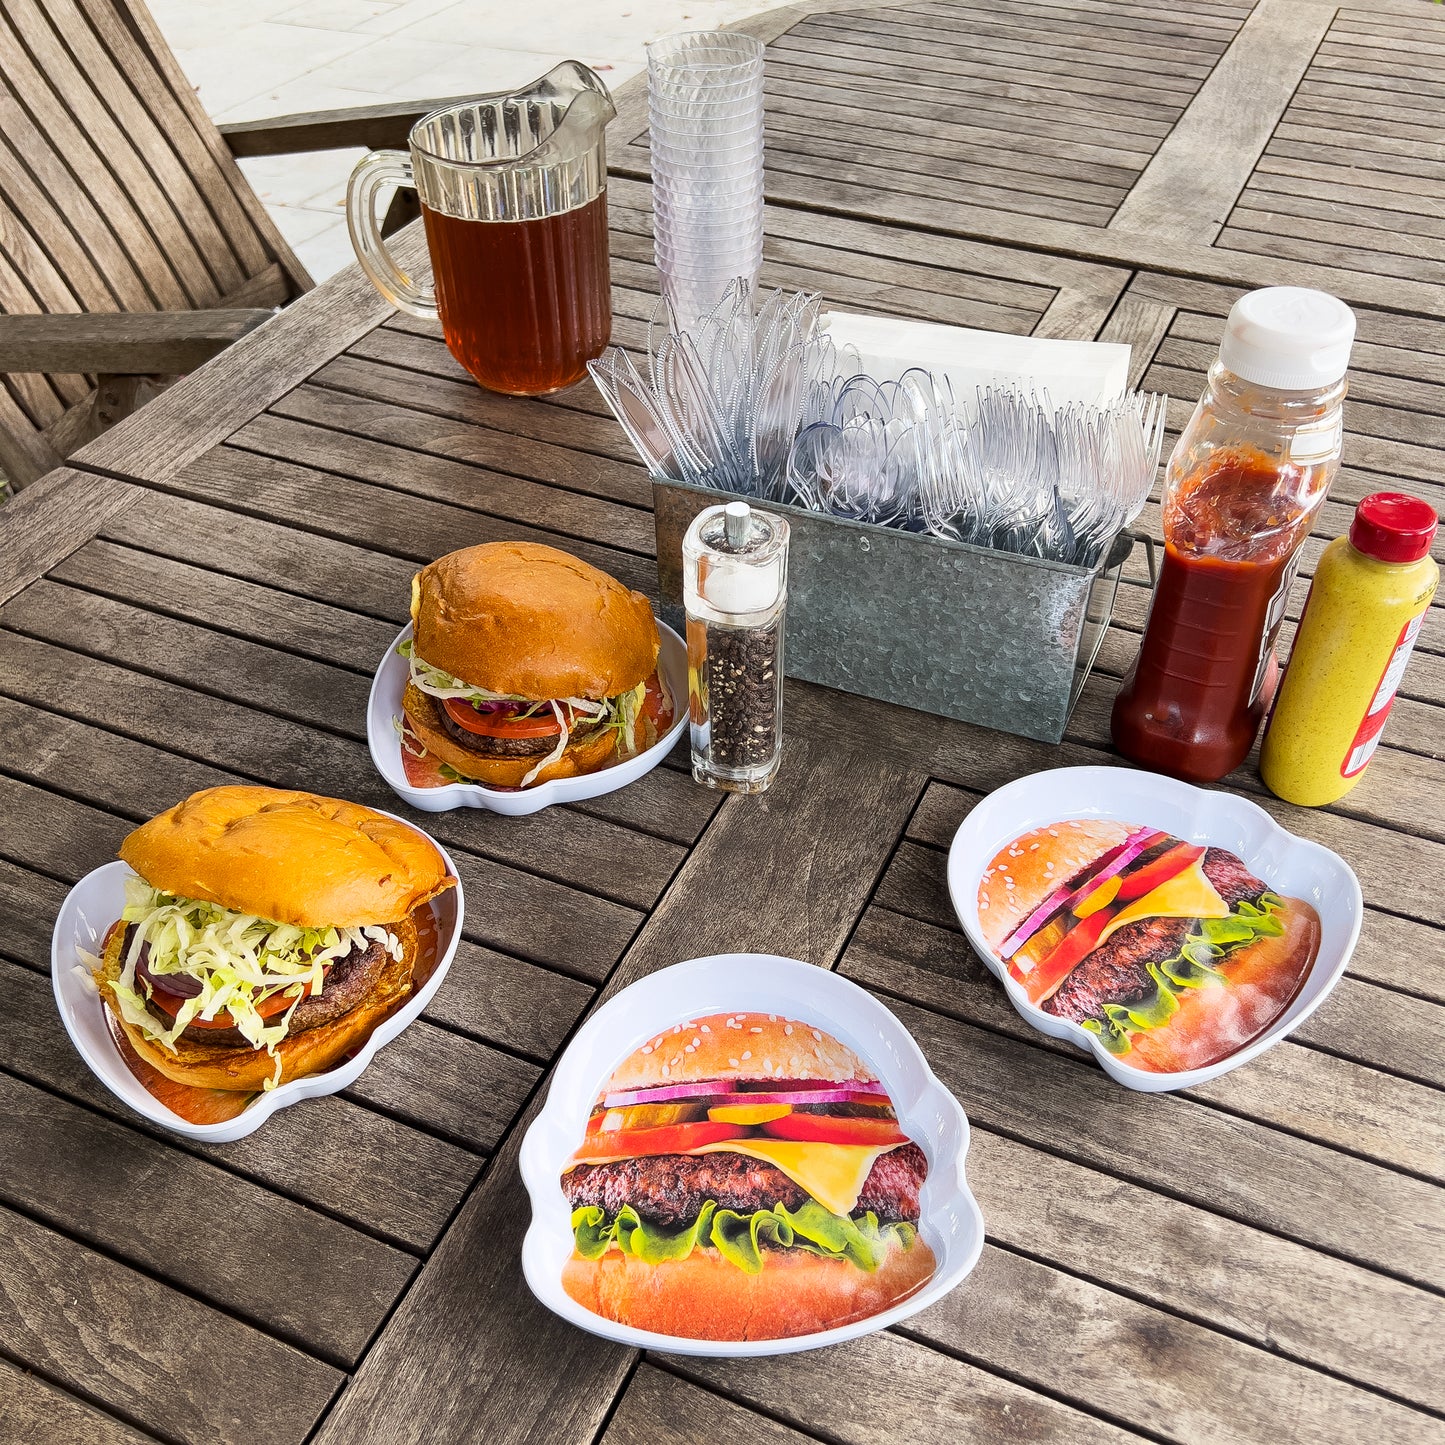 Mind Reader Bon Appetit Collection, Cheeseburger Serving Plates for Parties and BBQs, 4 Piece Set, Melamine, 7"L x 7"W x 1"H, White